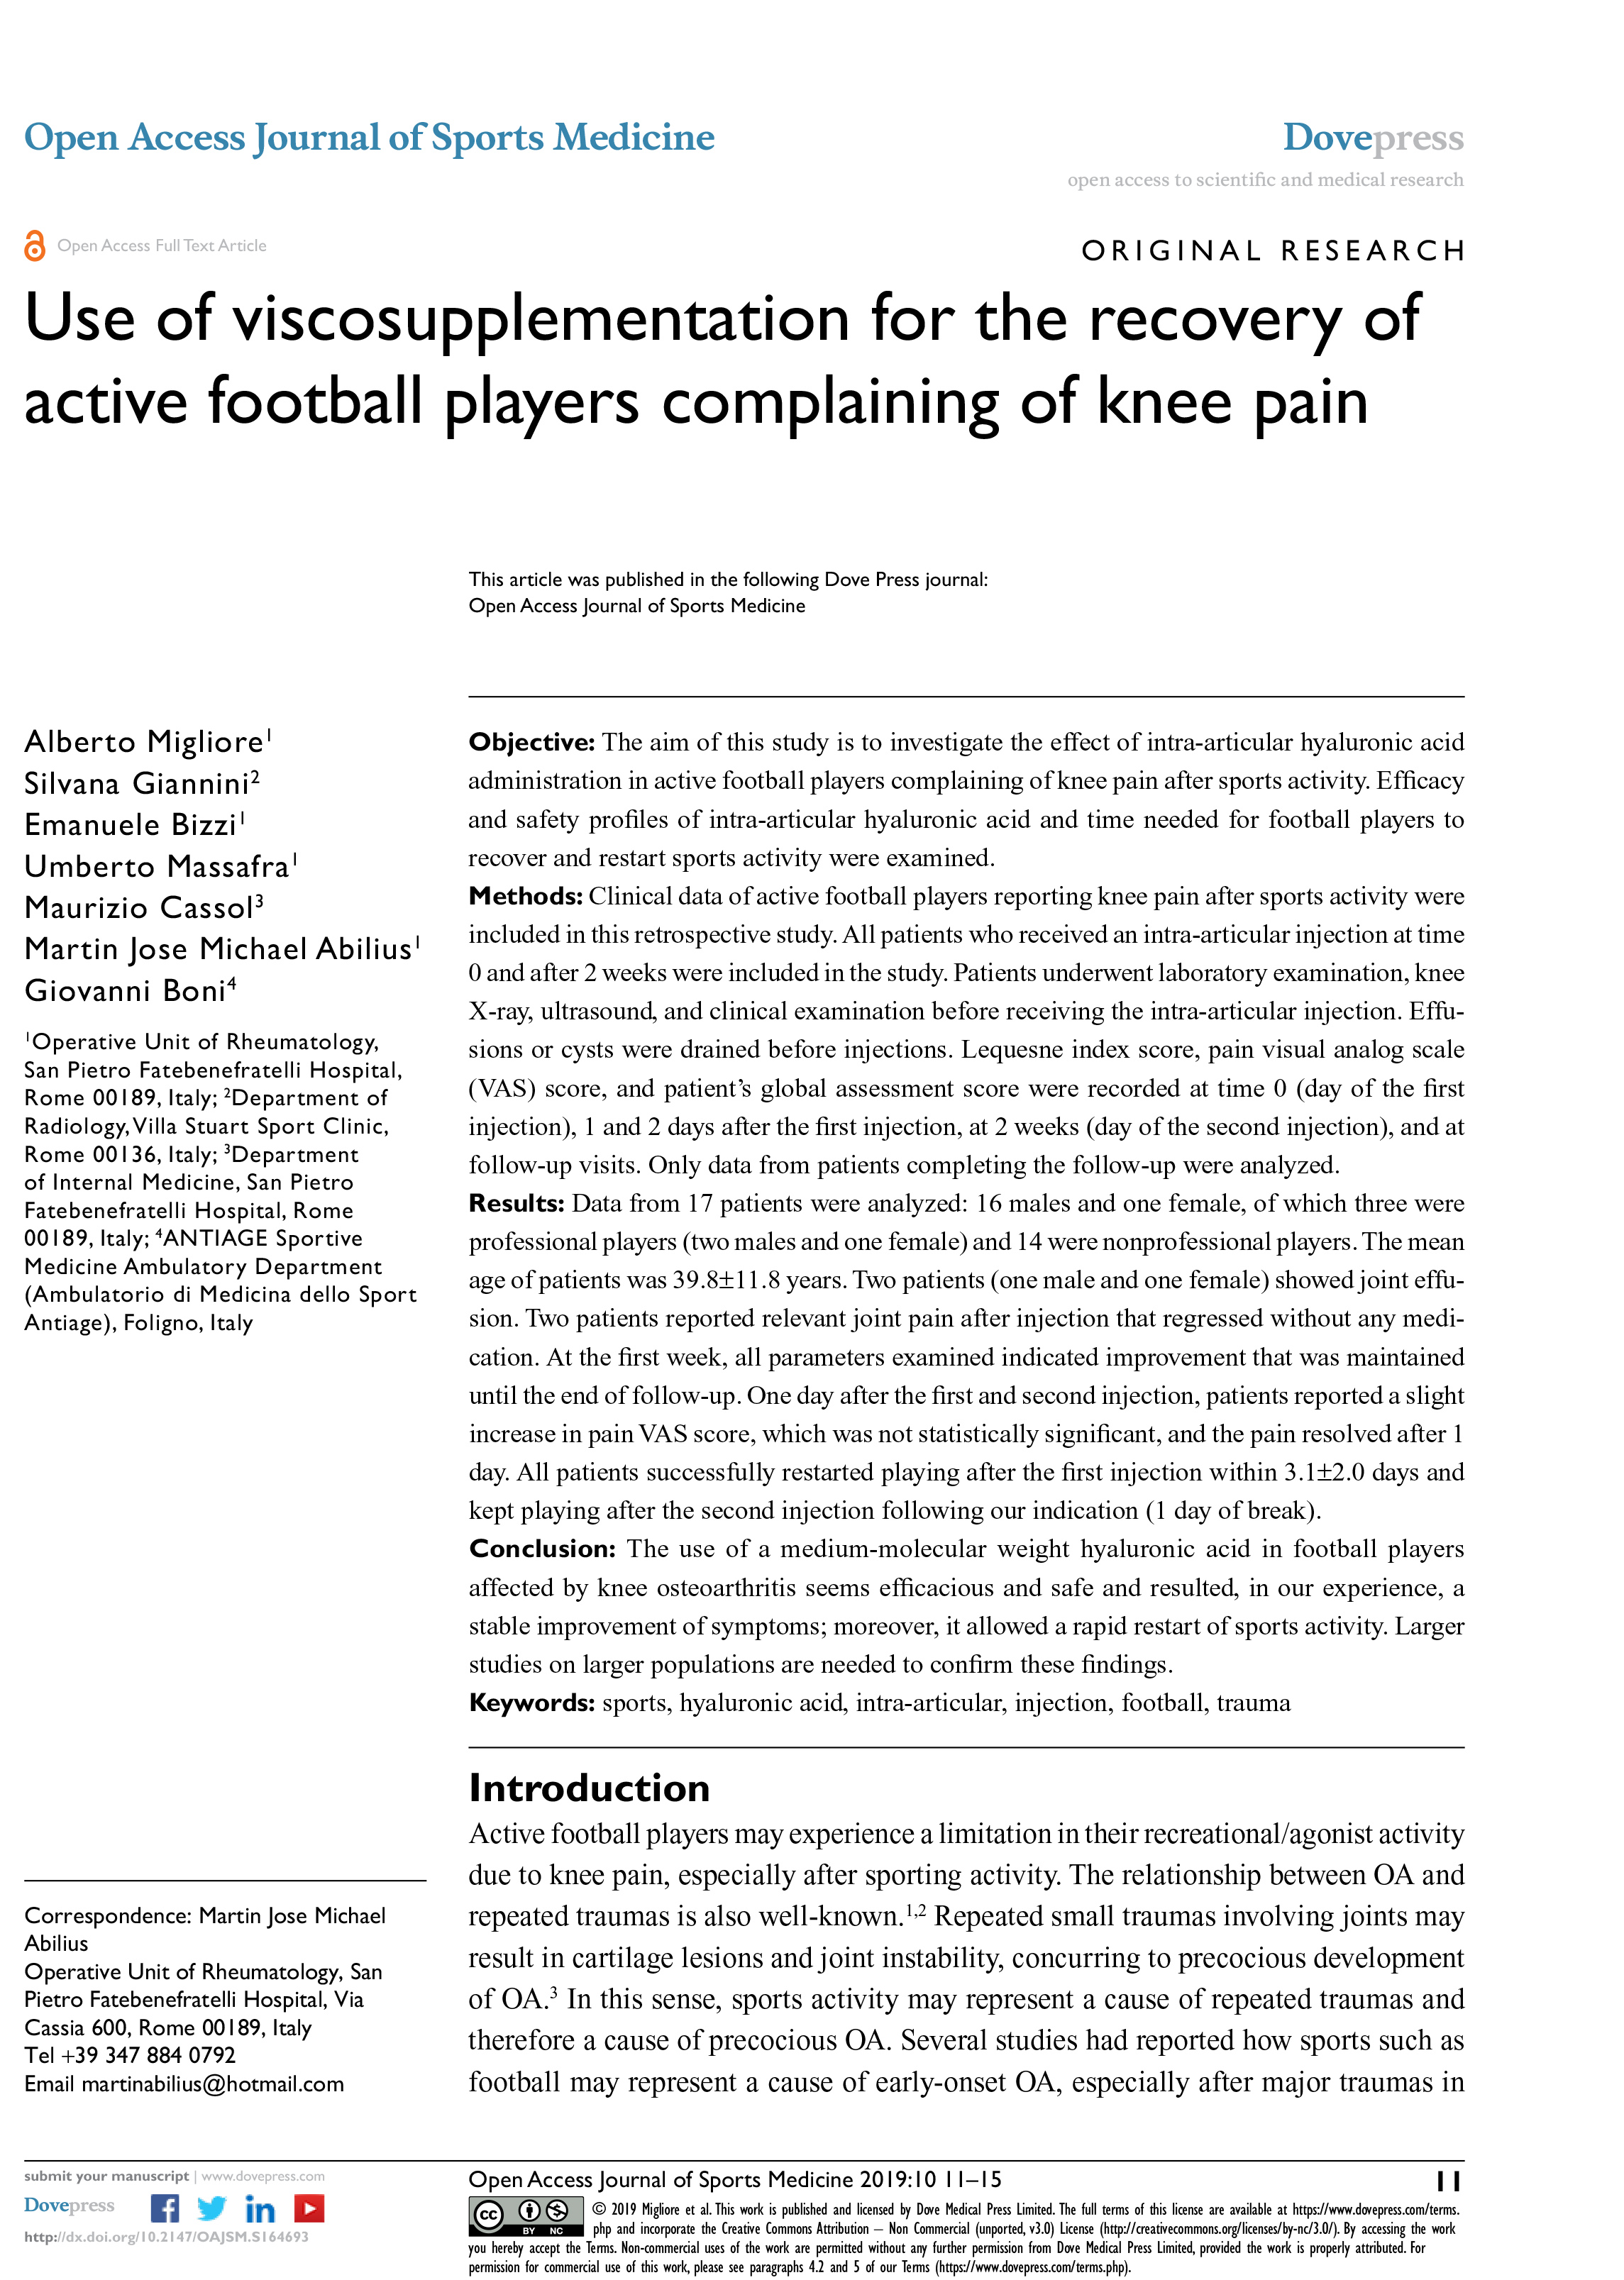 Useviscosupplementfor_the_recovery_of_active_football_players_complaining_of_knee_pain-1.jpg